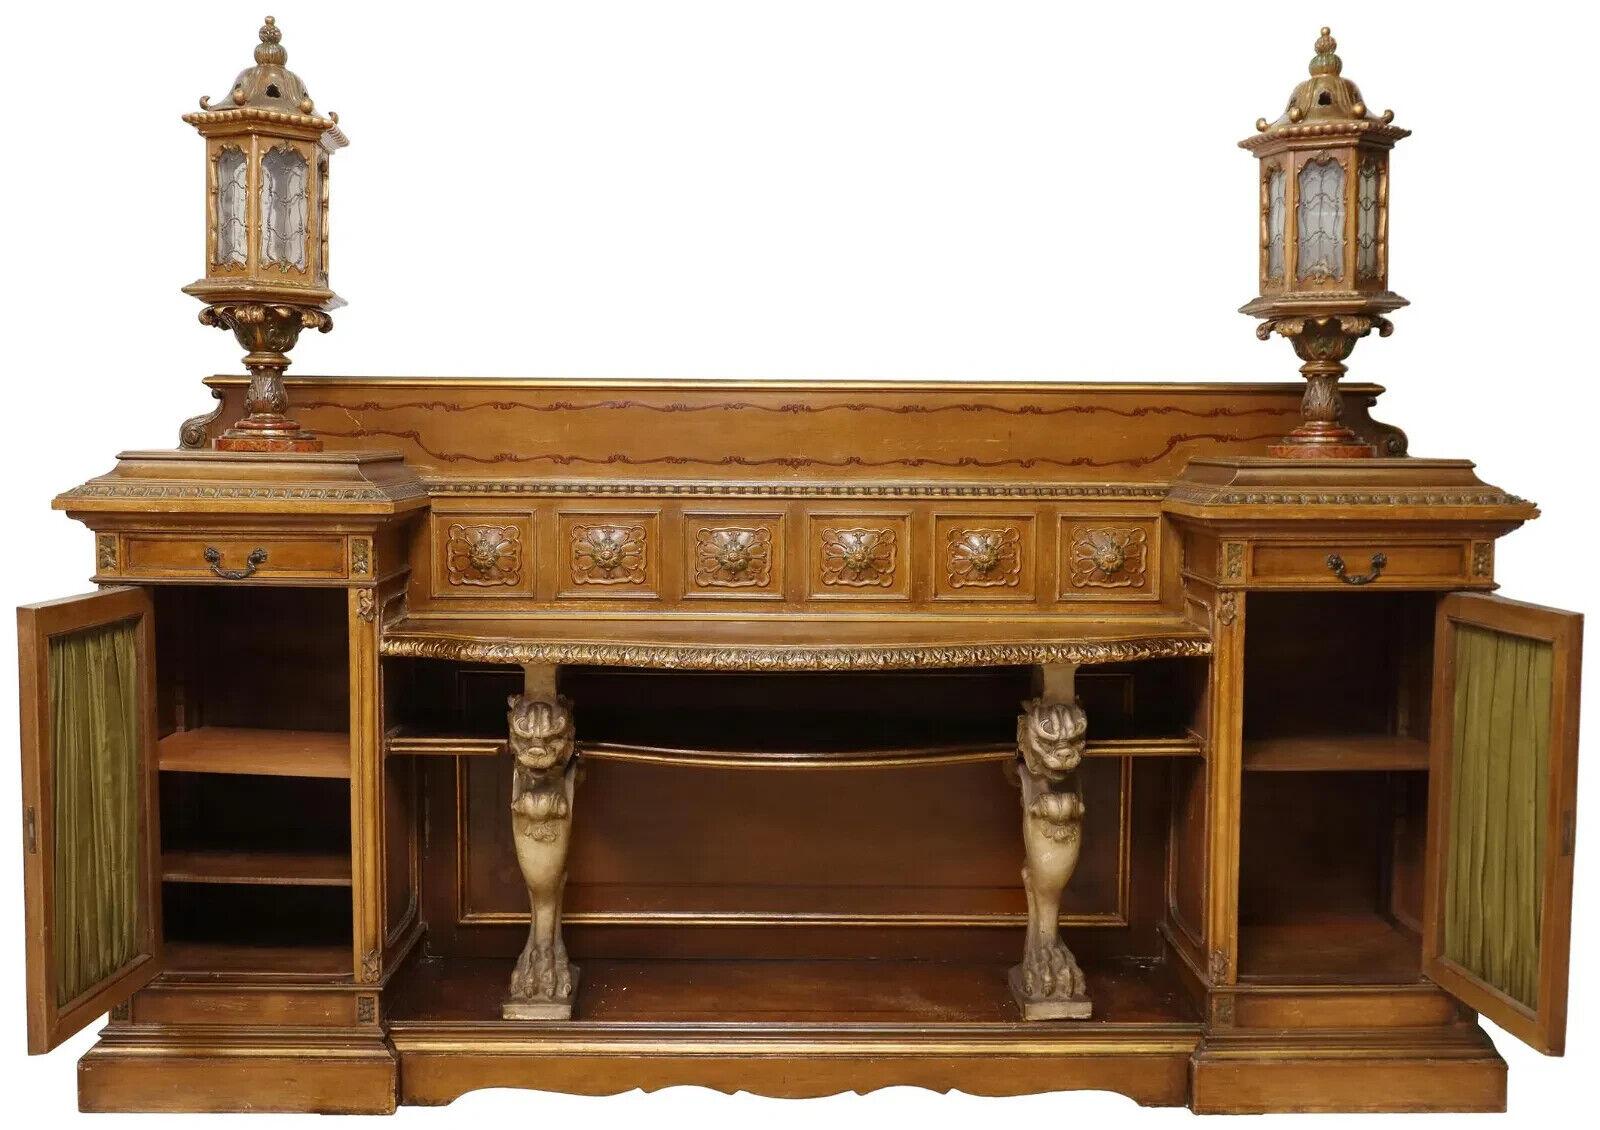 Gorgeous Antique Sideboard, Italian Paint Decorated, Carved Wood, with Lanterns, 1800s, 19th Century!!

Italian paint decorated and carved sideboard, 19th c., having shaped back splash, central open shelves, rising on composition/ceramic? lion